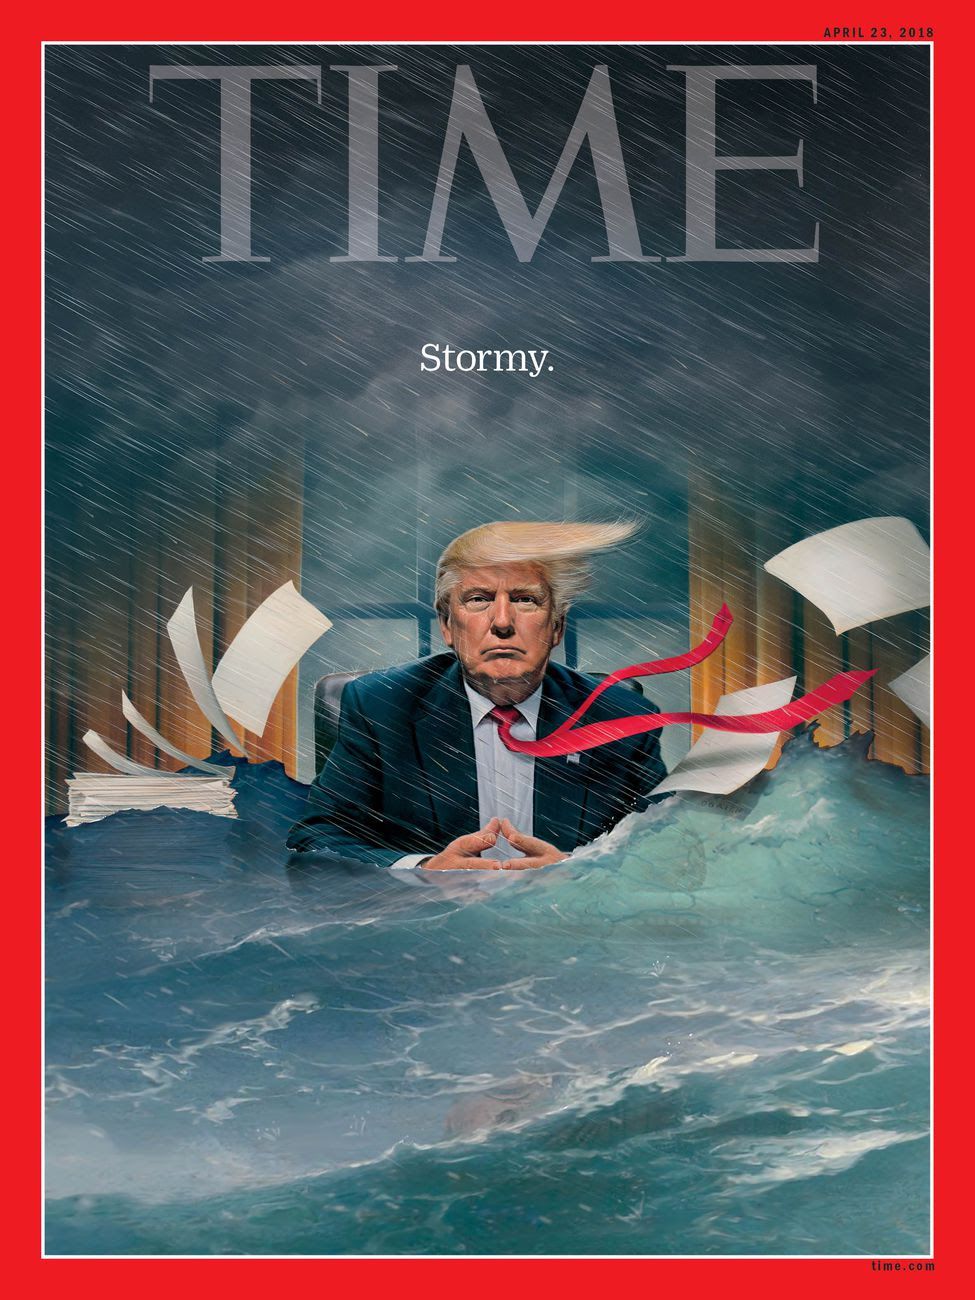 A TIME cover of Trump sitting in a stormy and flooded Oval Office